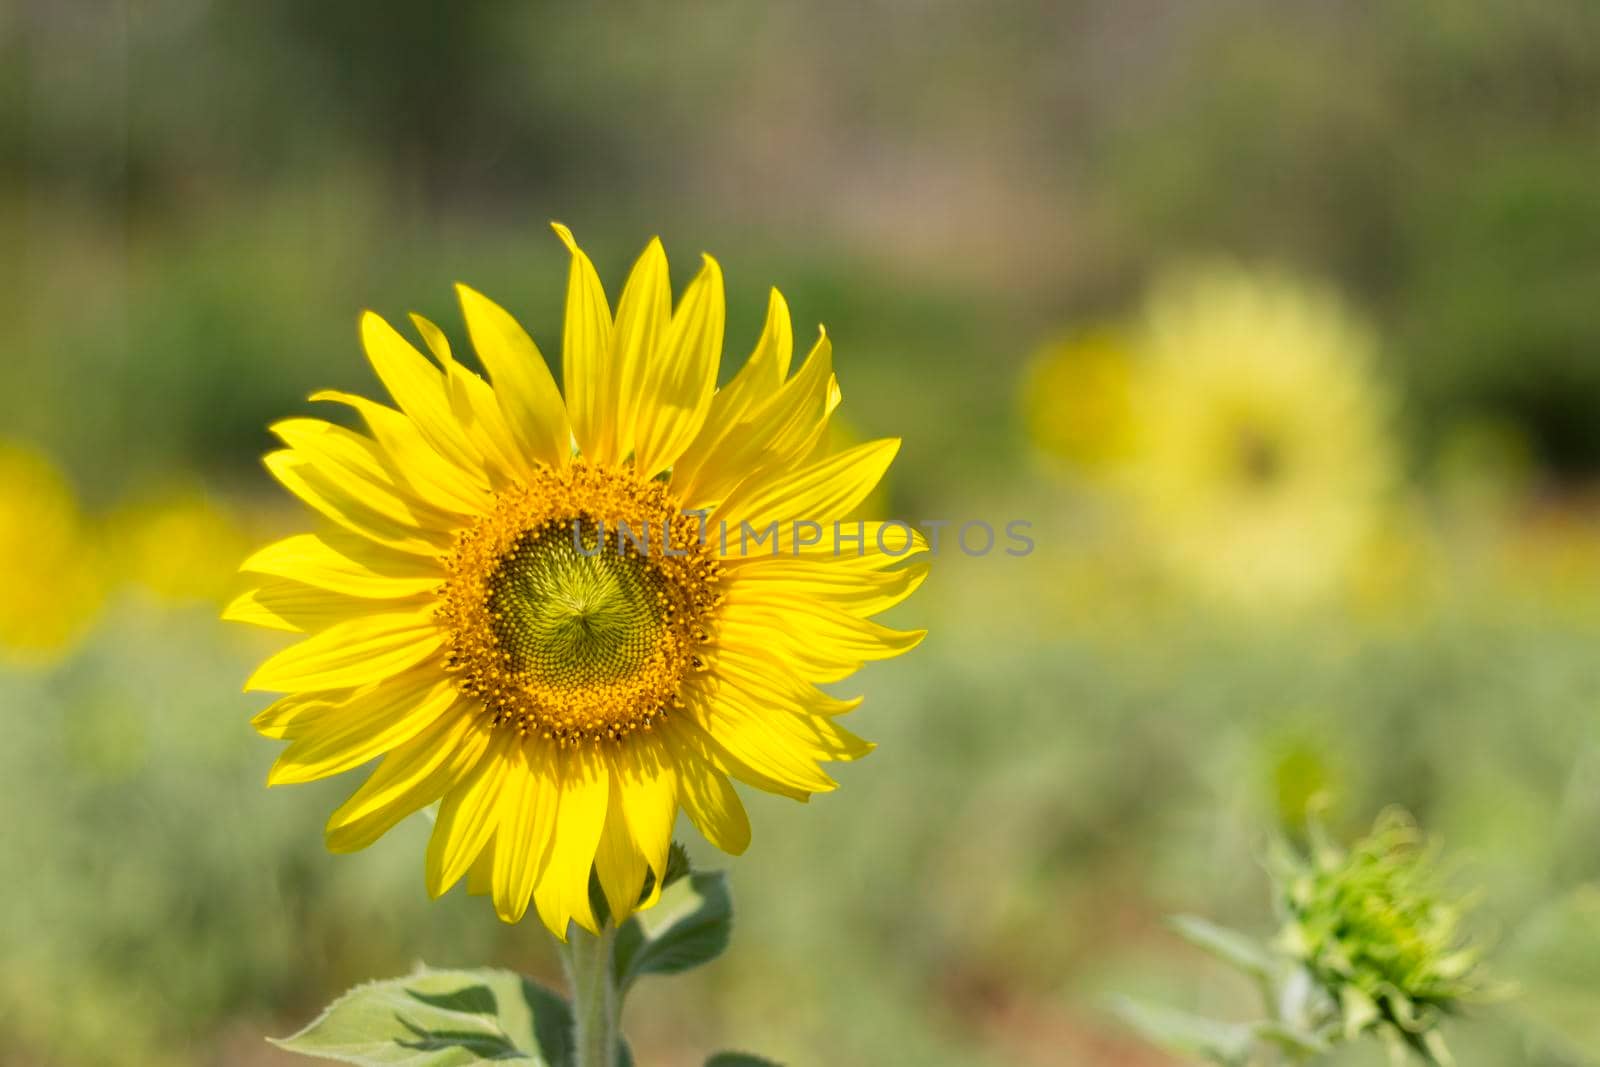 close-up of a beautiful sunflower in a field . Sunflower natural background. Sunflower blooming. bright cheerful concept idea